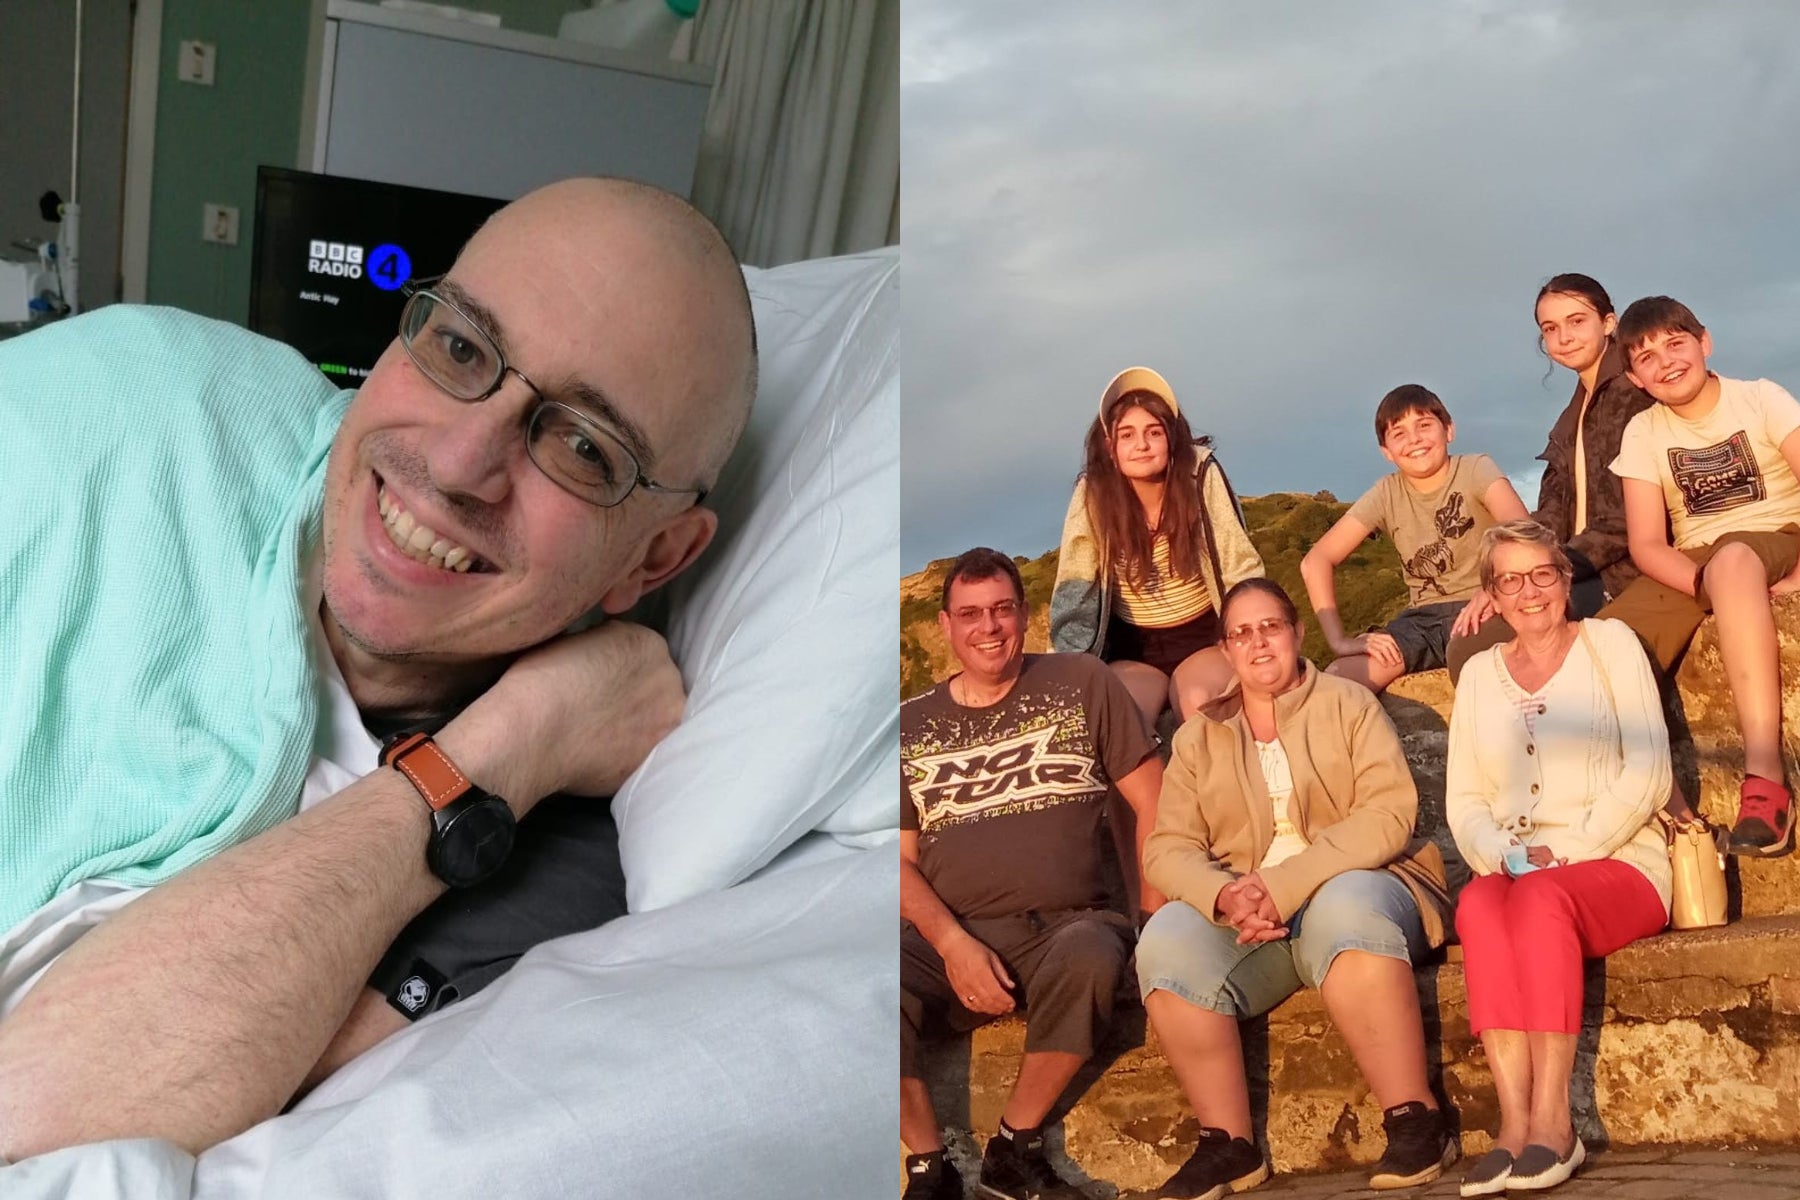 Michael is looking forward to celebrating one year post-diagnosis in remission